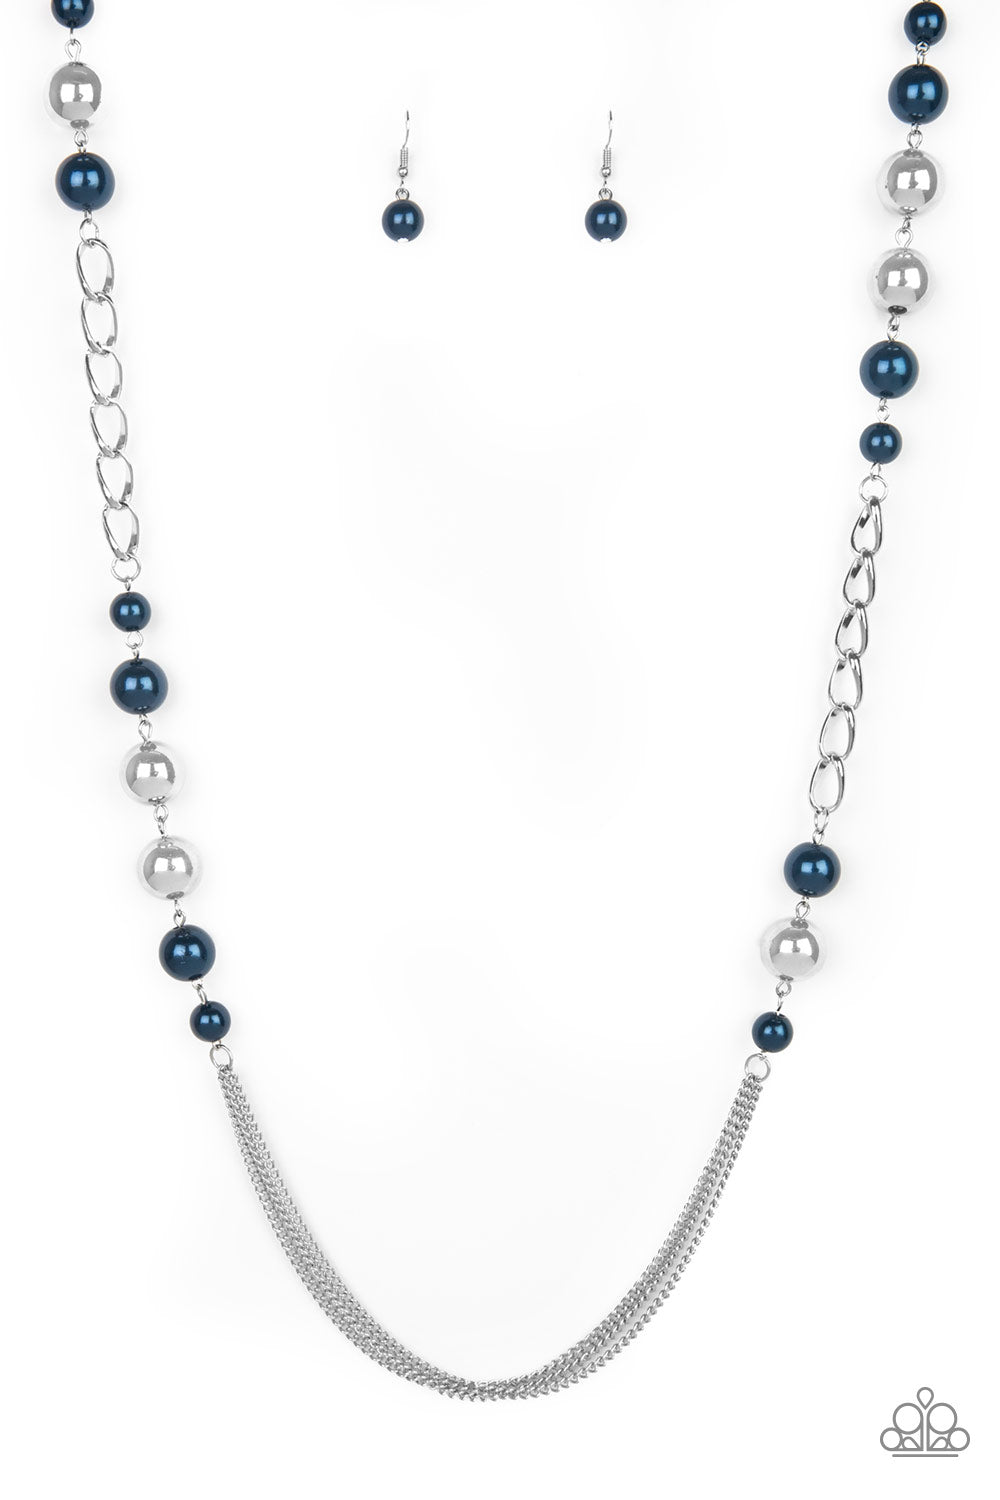 Paparazzi Accessories Uptown Talker - Blue Necklace - Be Adored Jewelry